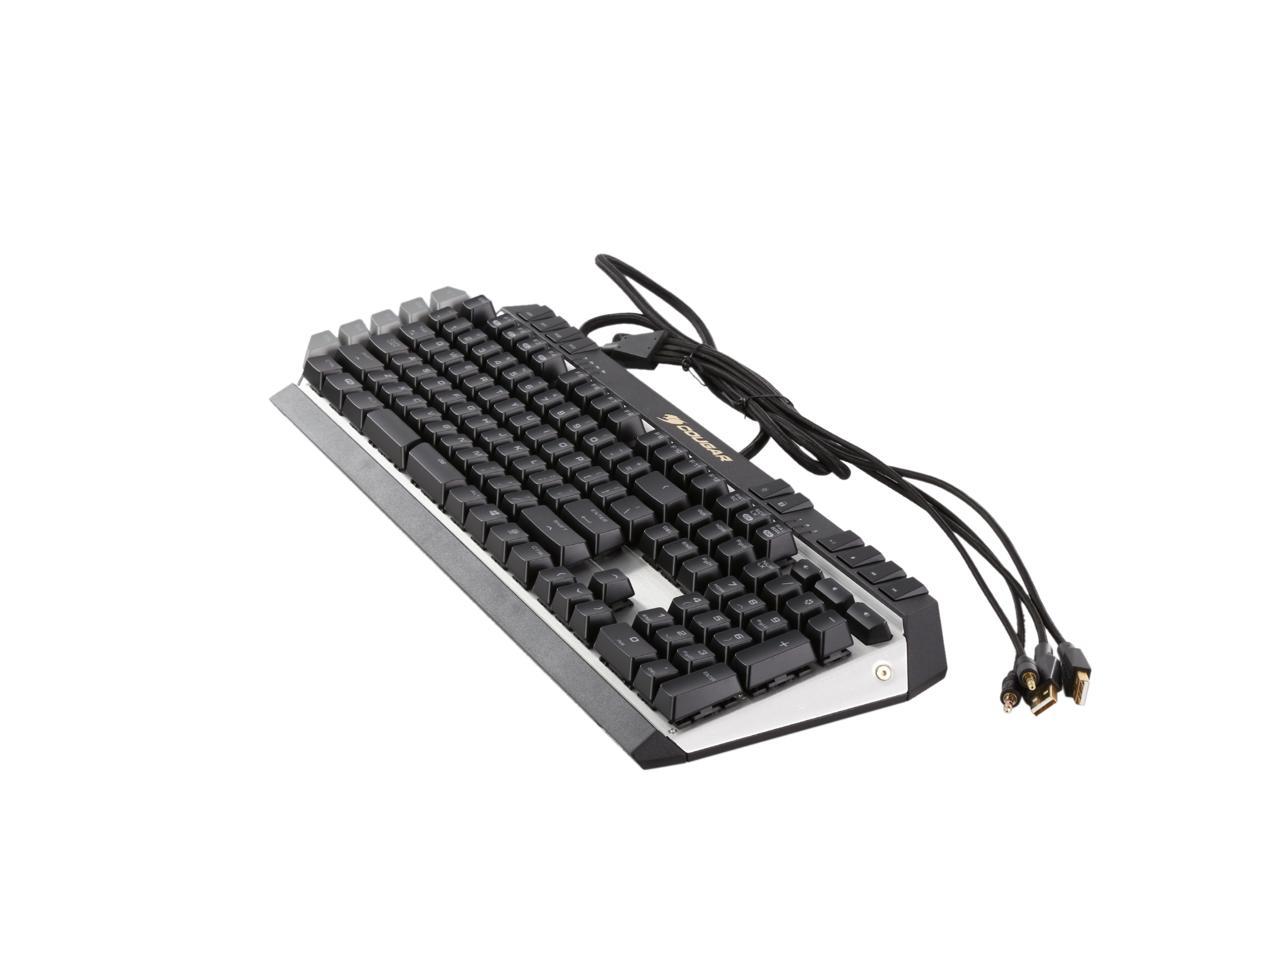 does das mechanical keyboard for mac have expose funtion key